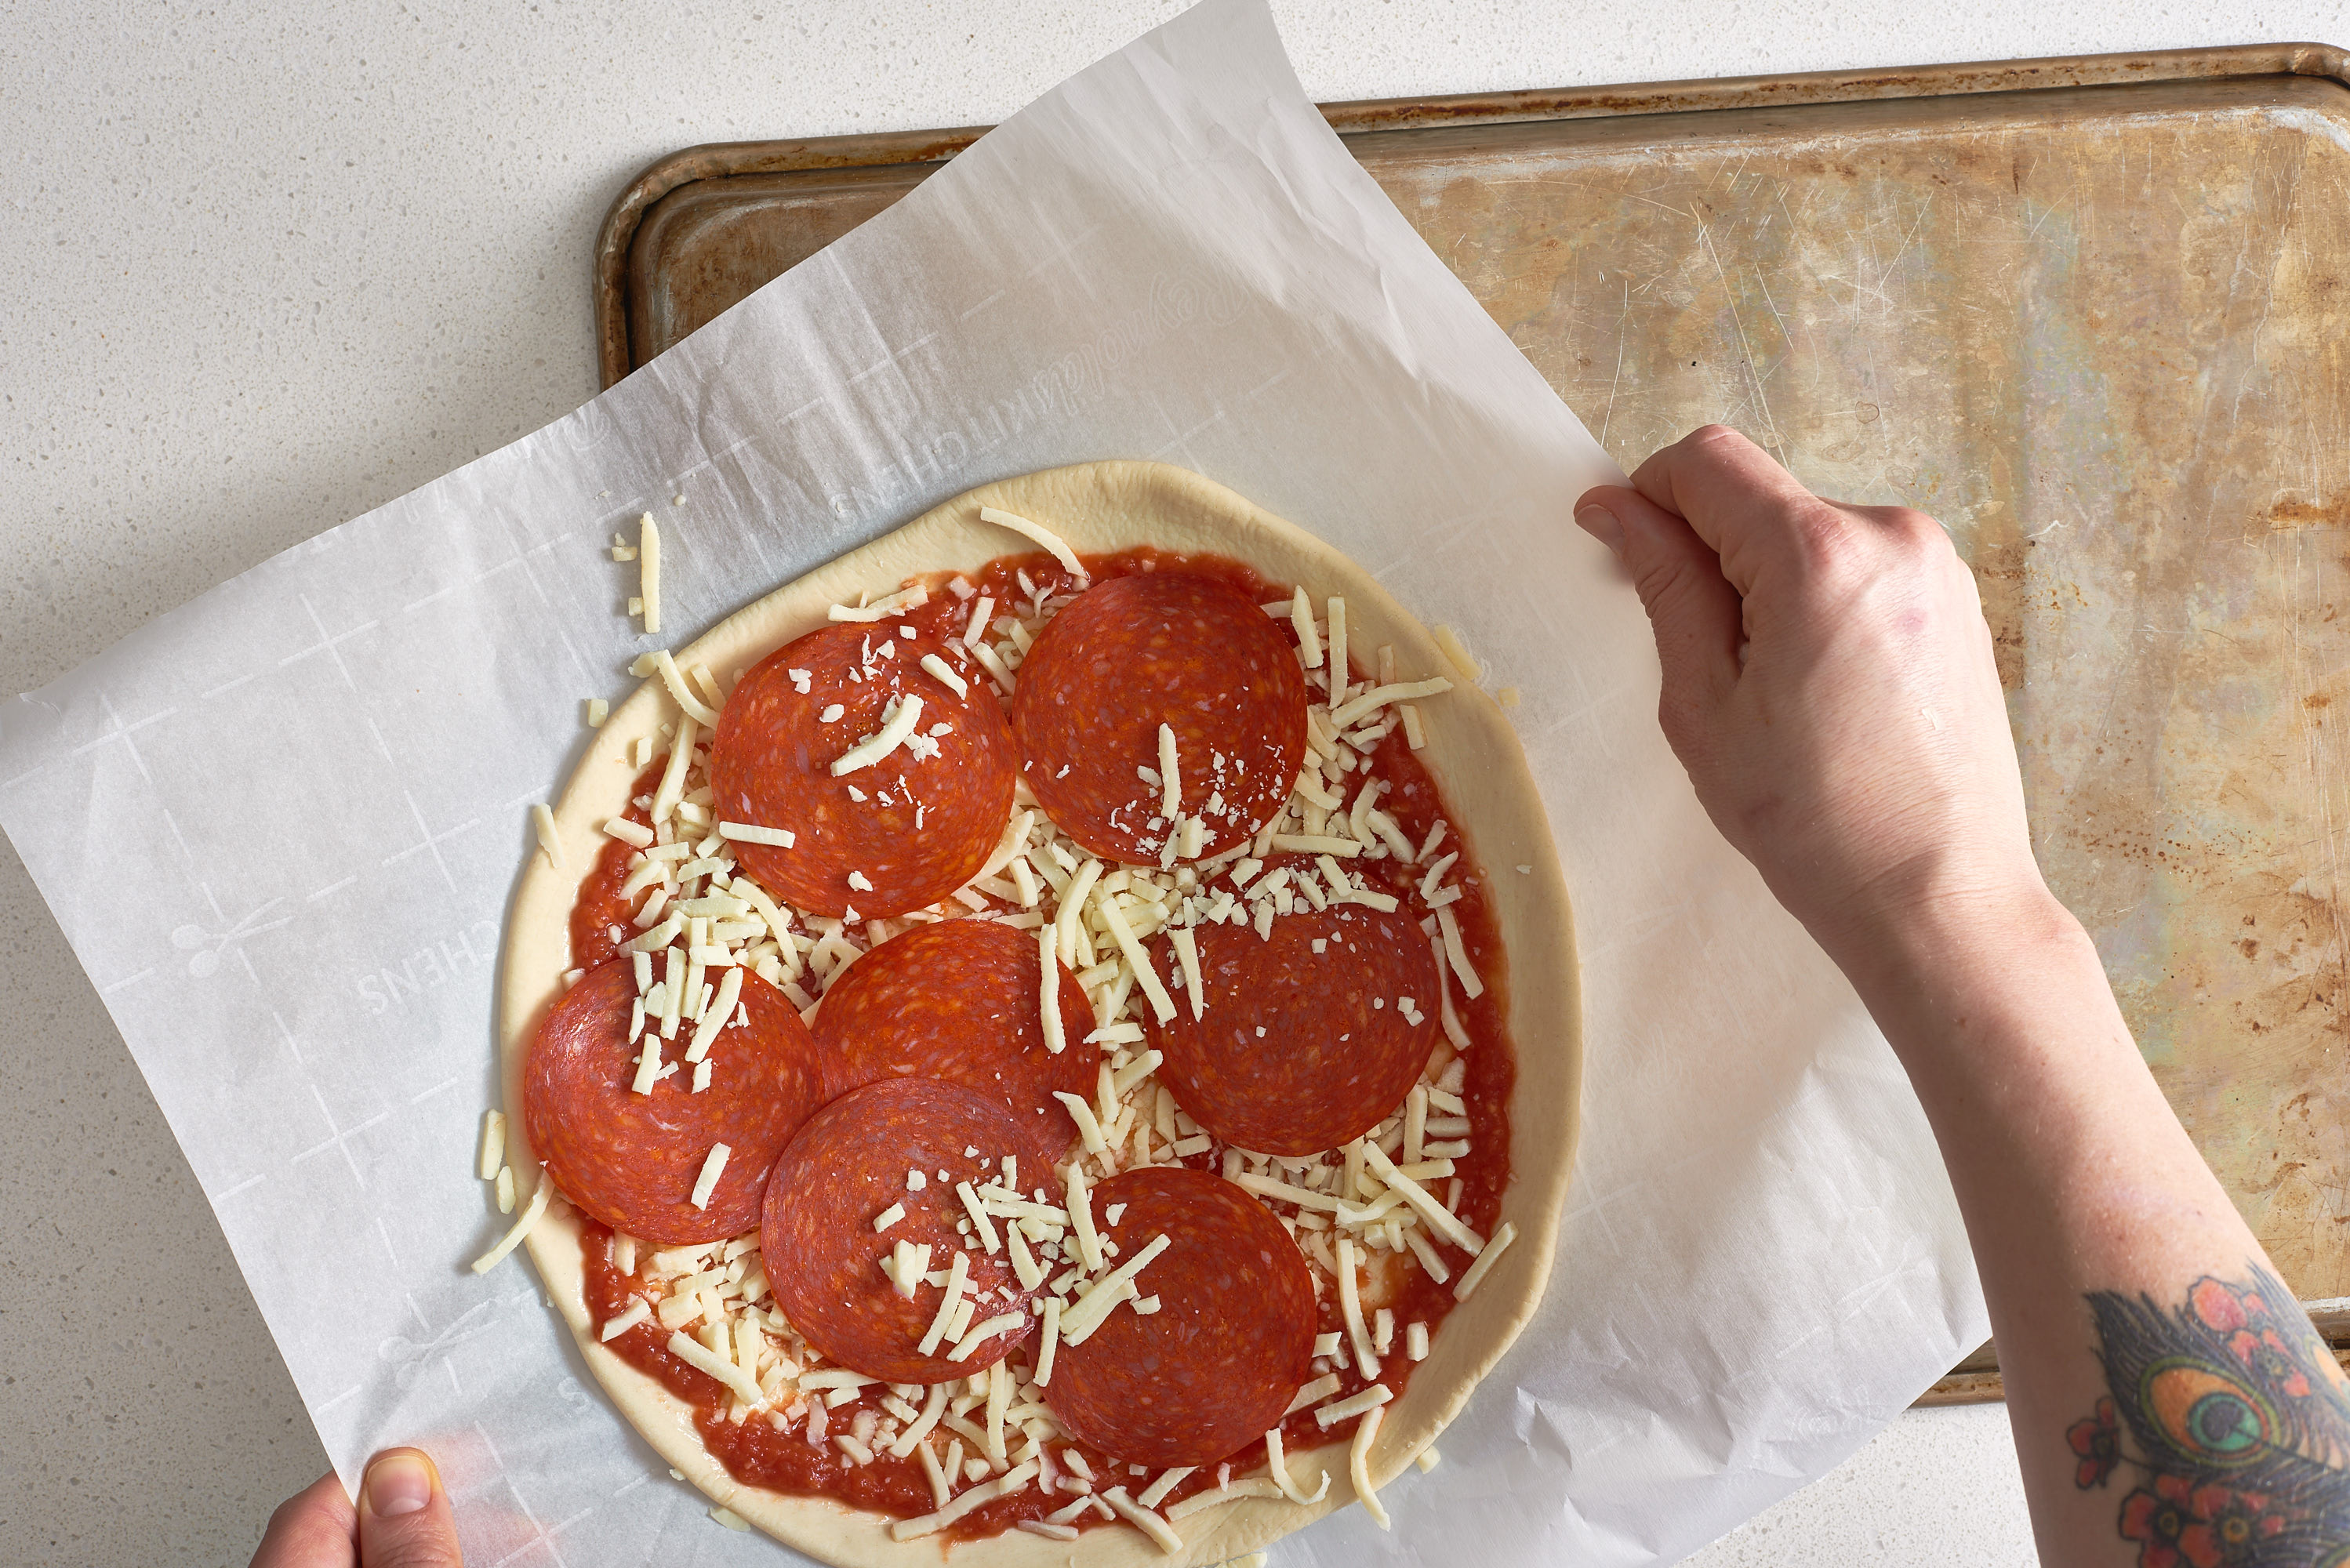 Bake Perfect Homemade Pizza With or Without a Baking Stone